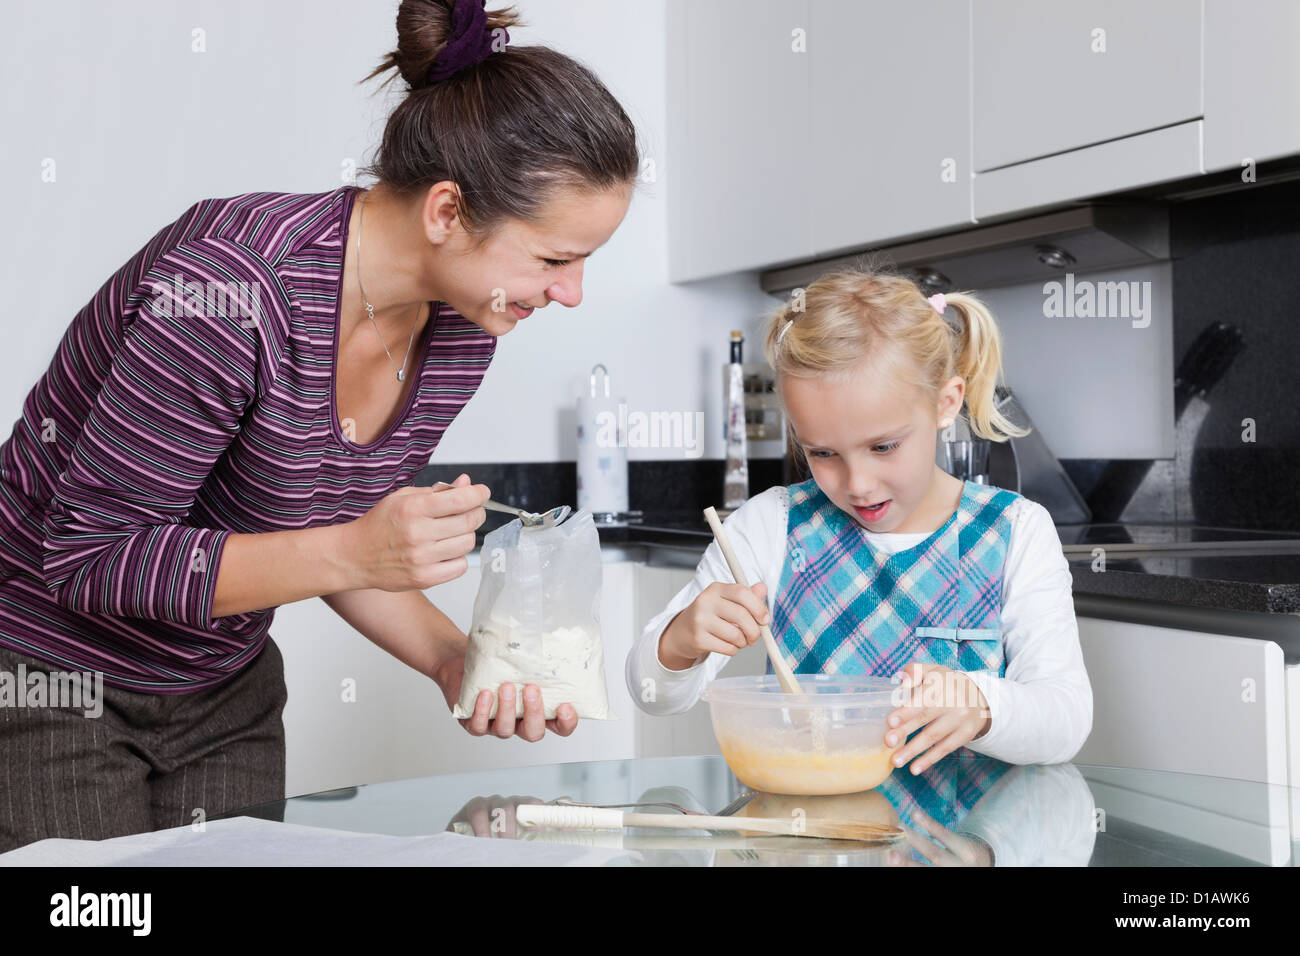 Happy mother daughter baking together in kitchen Banque D'Images